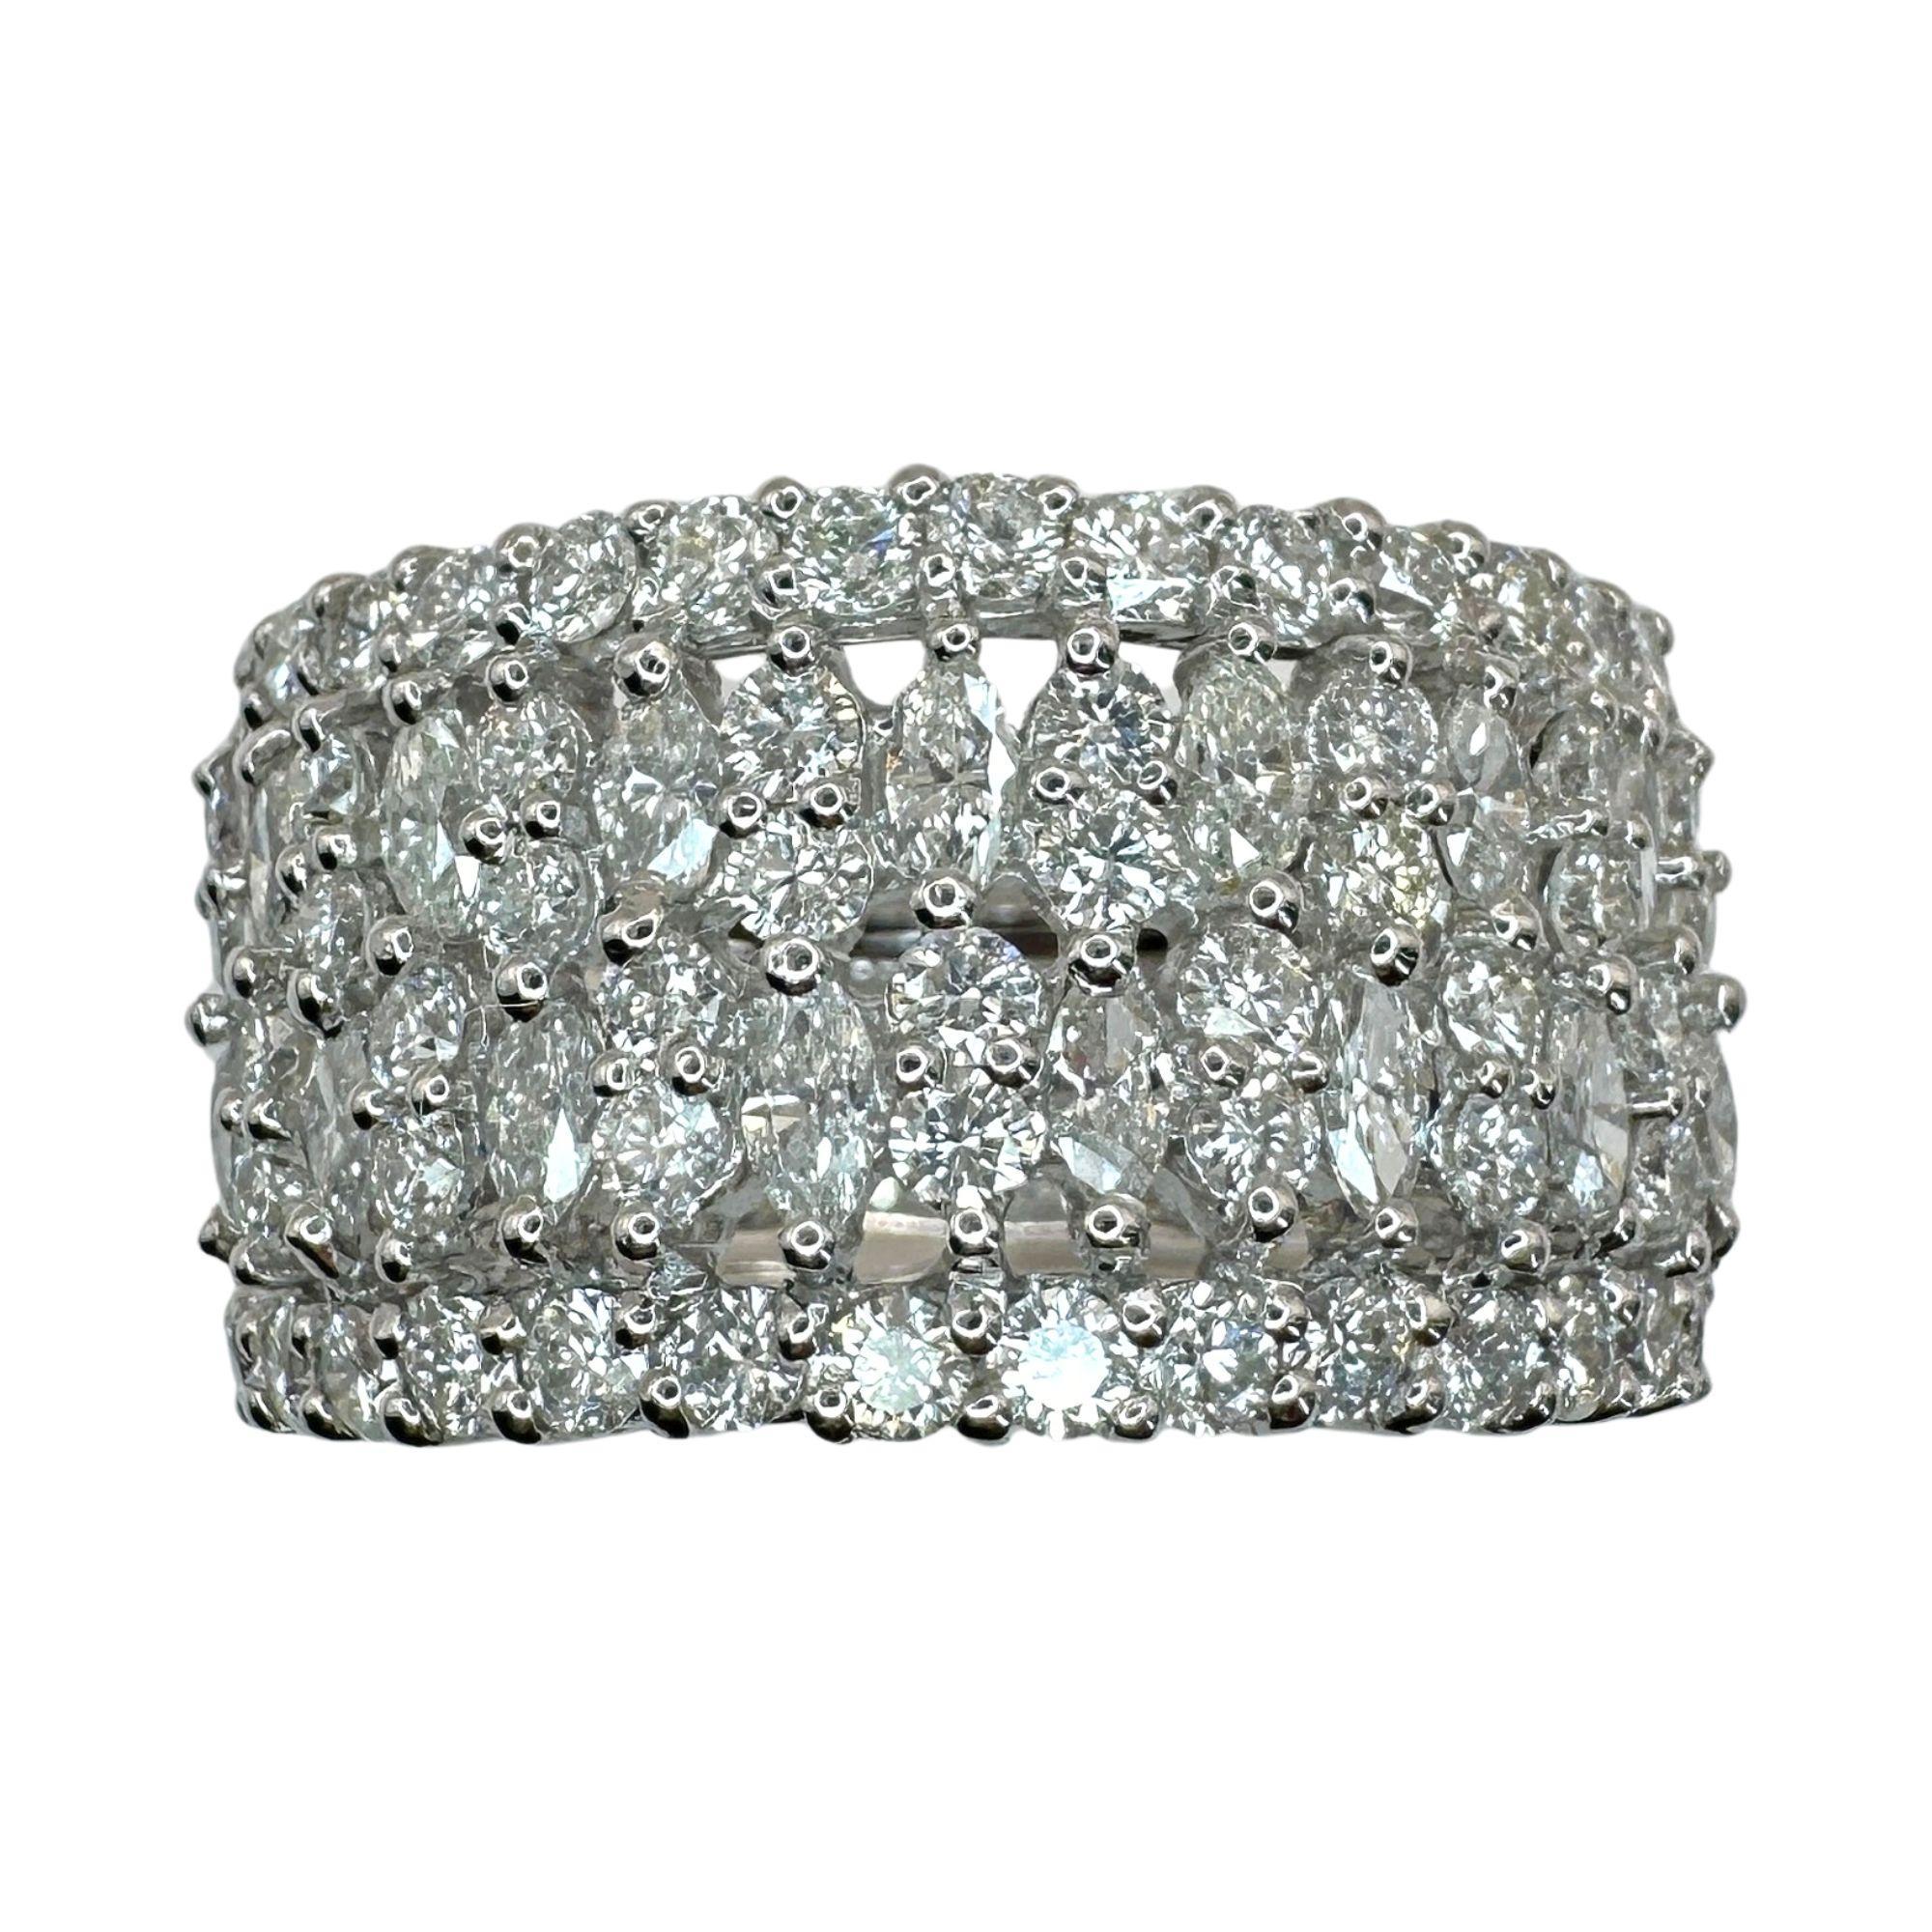 Indulge in luxury with this 18k Marquise Cut Diamond Wide Band Ring. Crafted from 18k White Gold and adorned with 2.37 carats of sparkling diamonds, this ring exudes elegance and sophistication. In excellent condition with a weight of 10.3